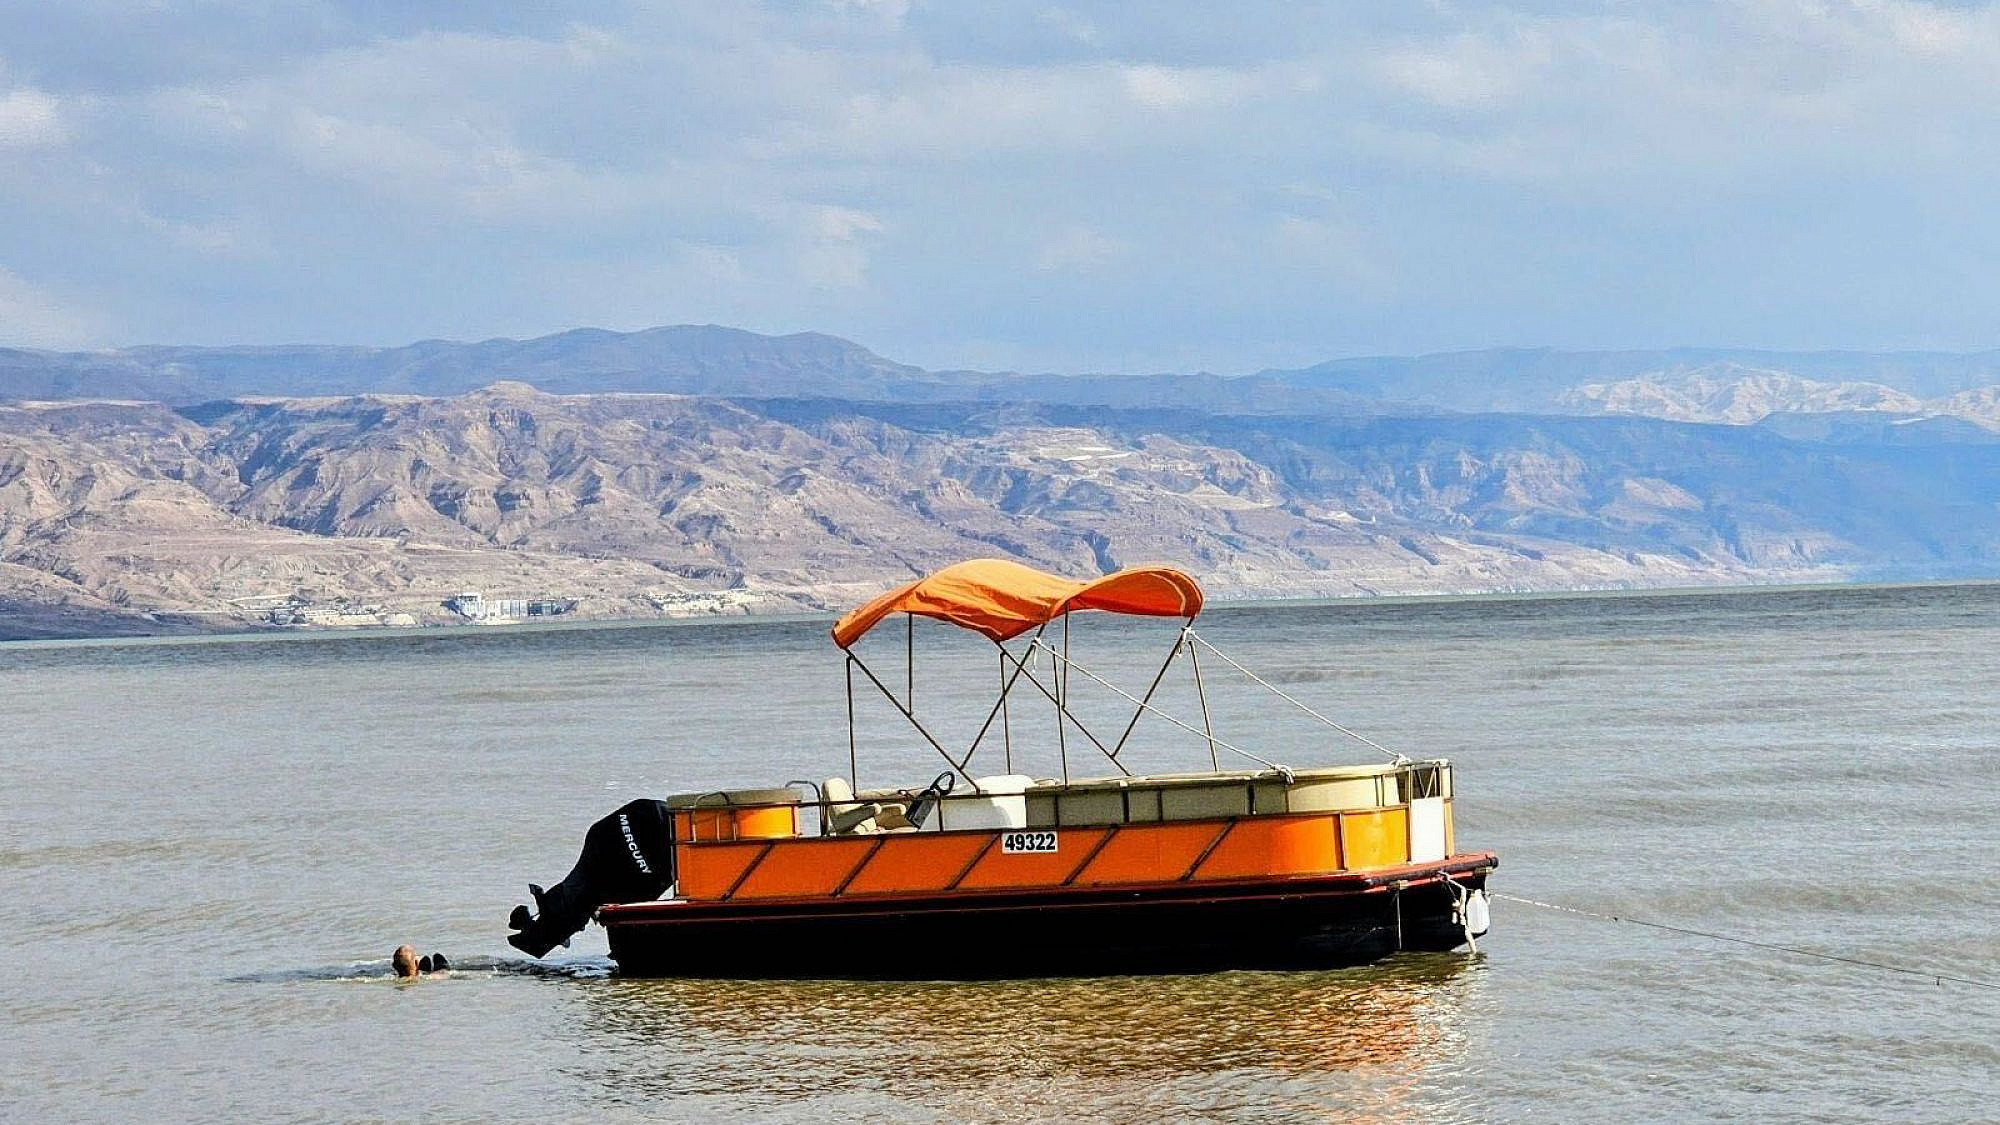 The Dead Sea Boat will operate Sunday through Friday. Photo by Noam Bedein.